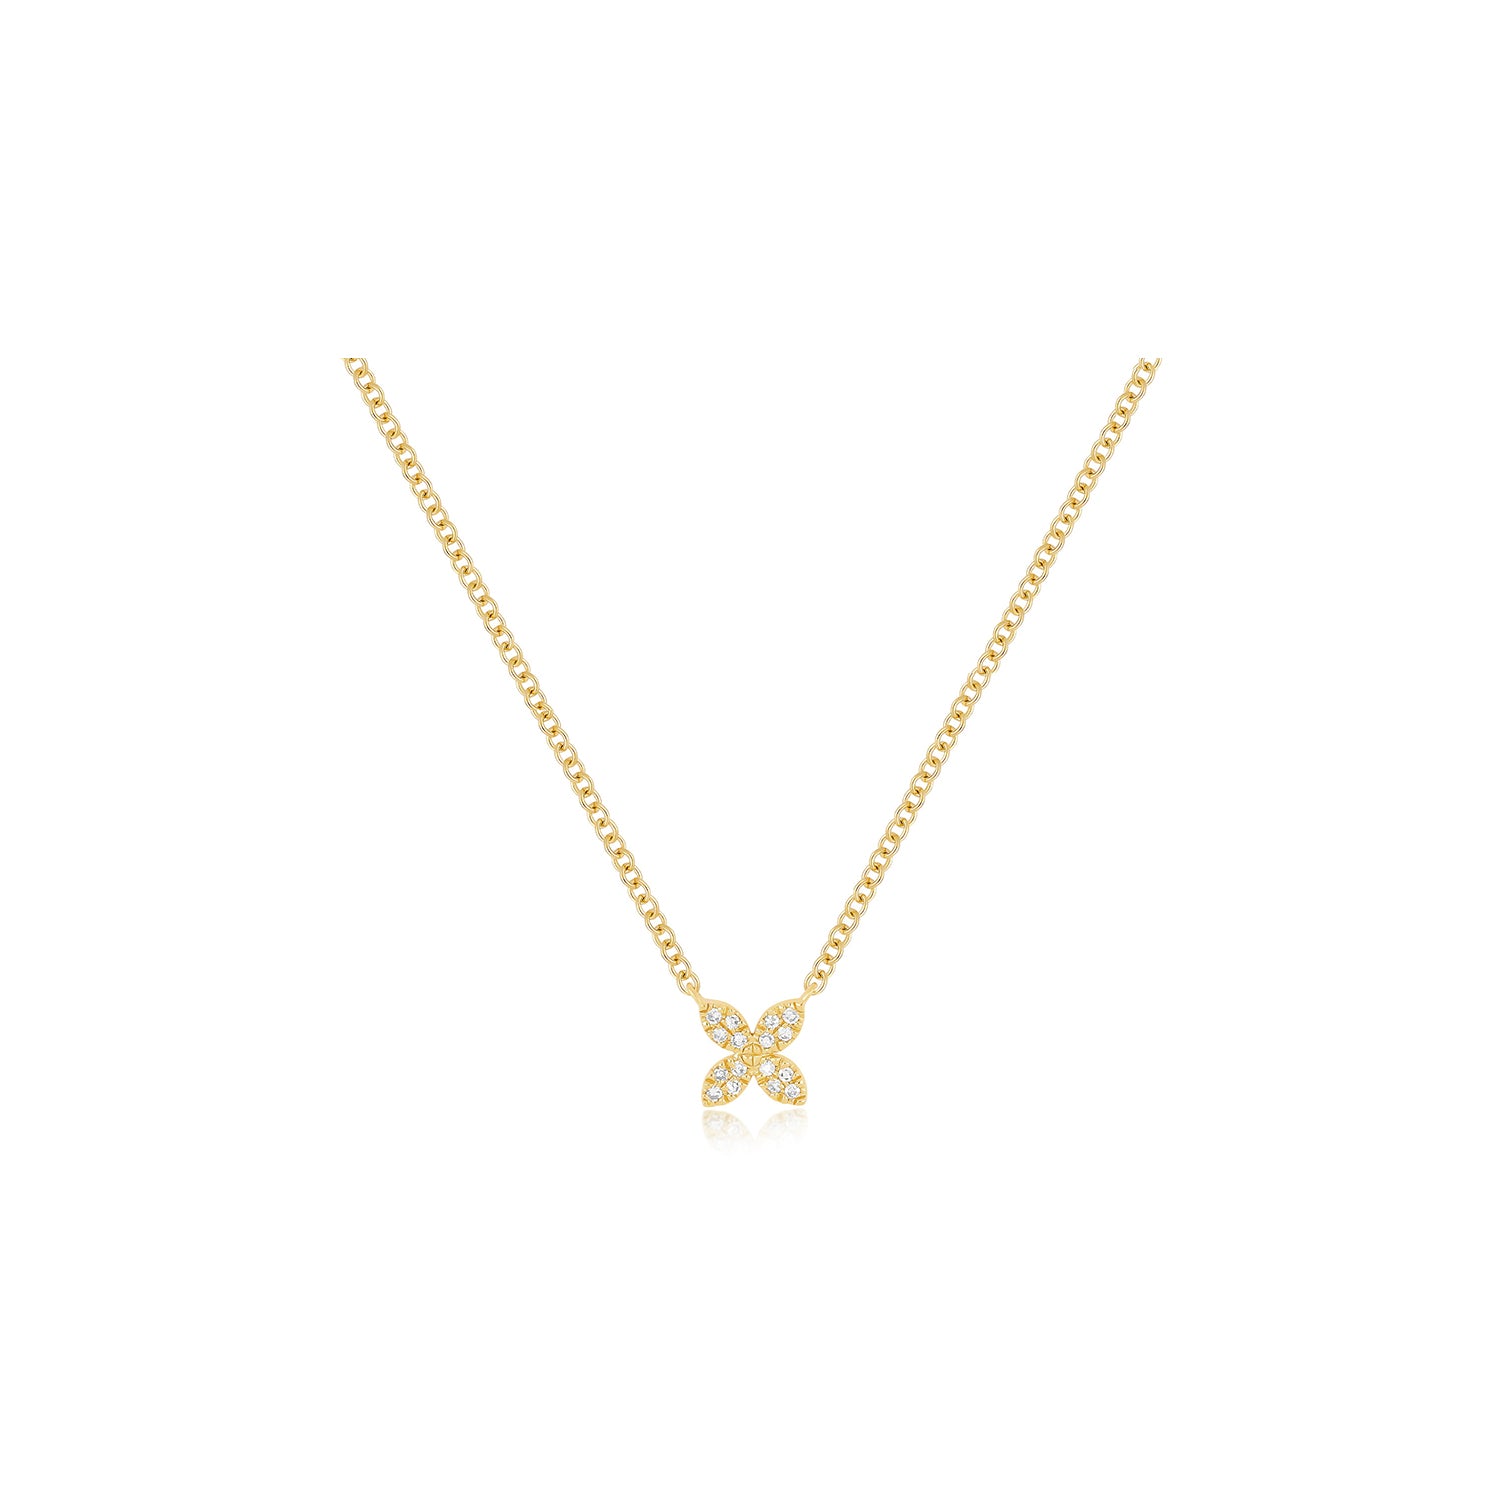 Diamond Blossom Necklace in 14k yellow gold